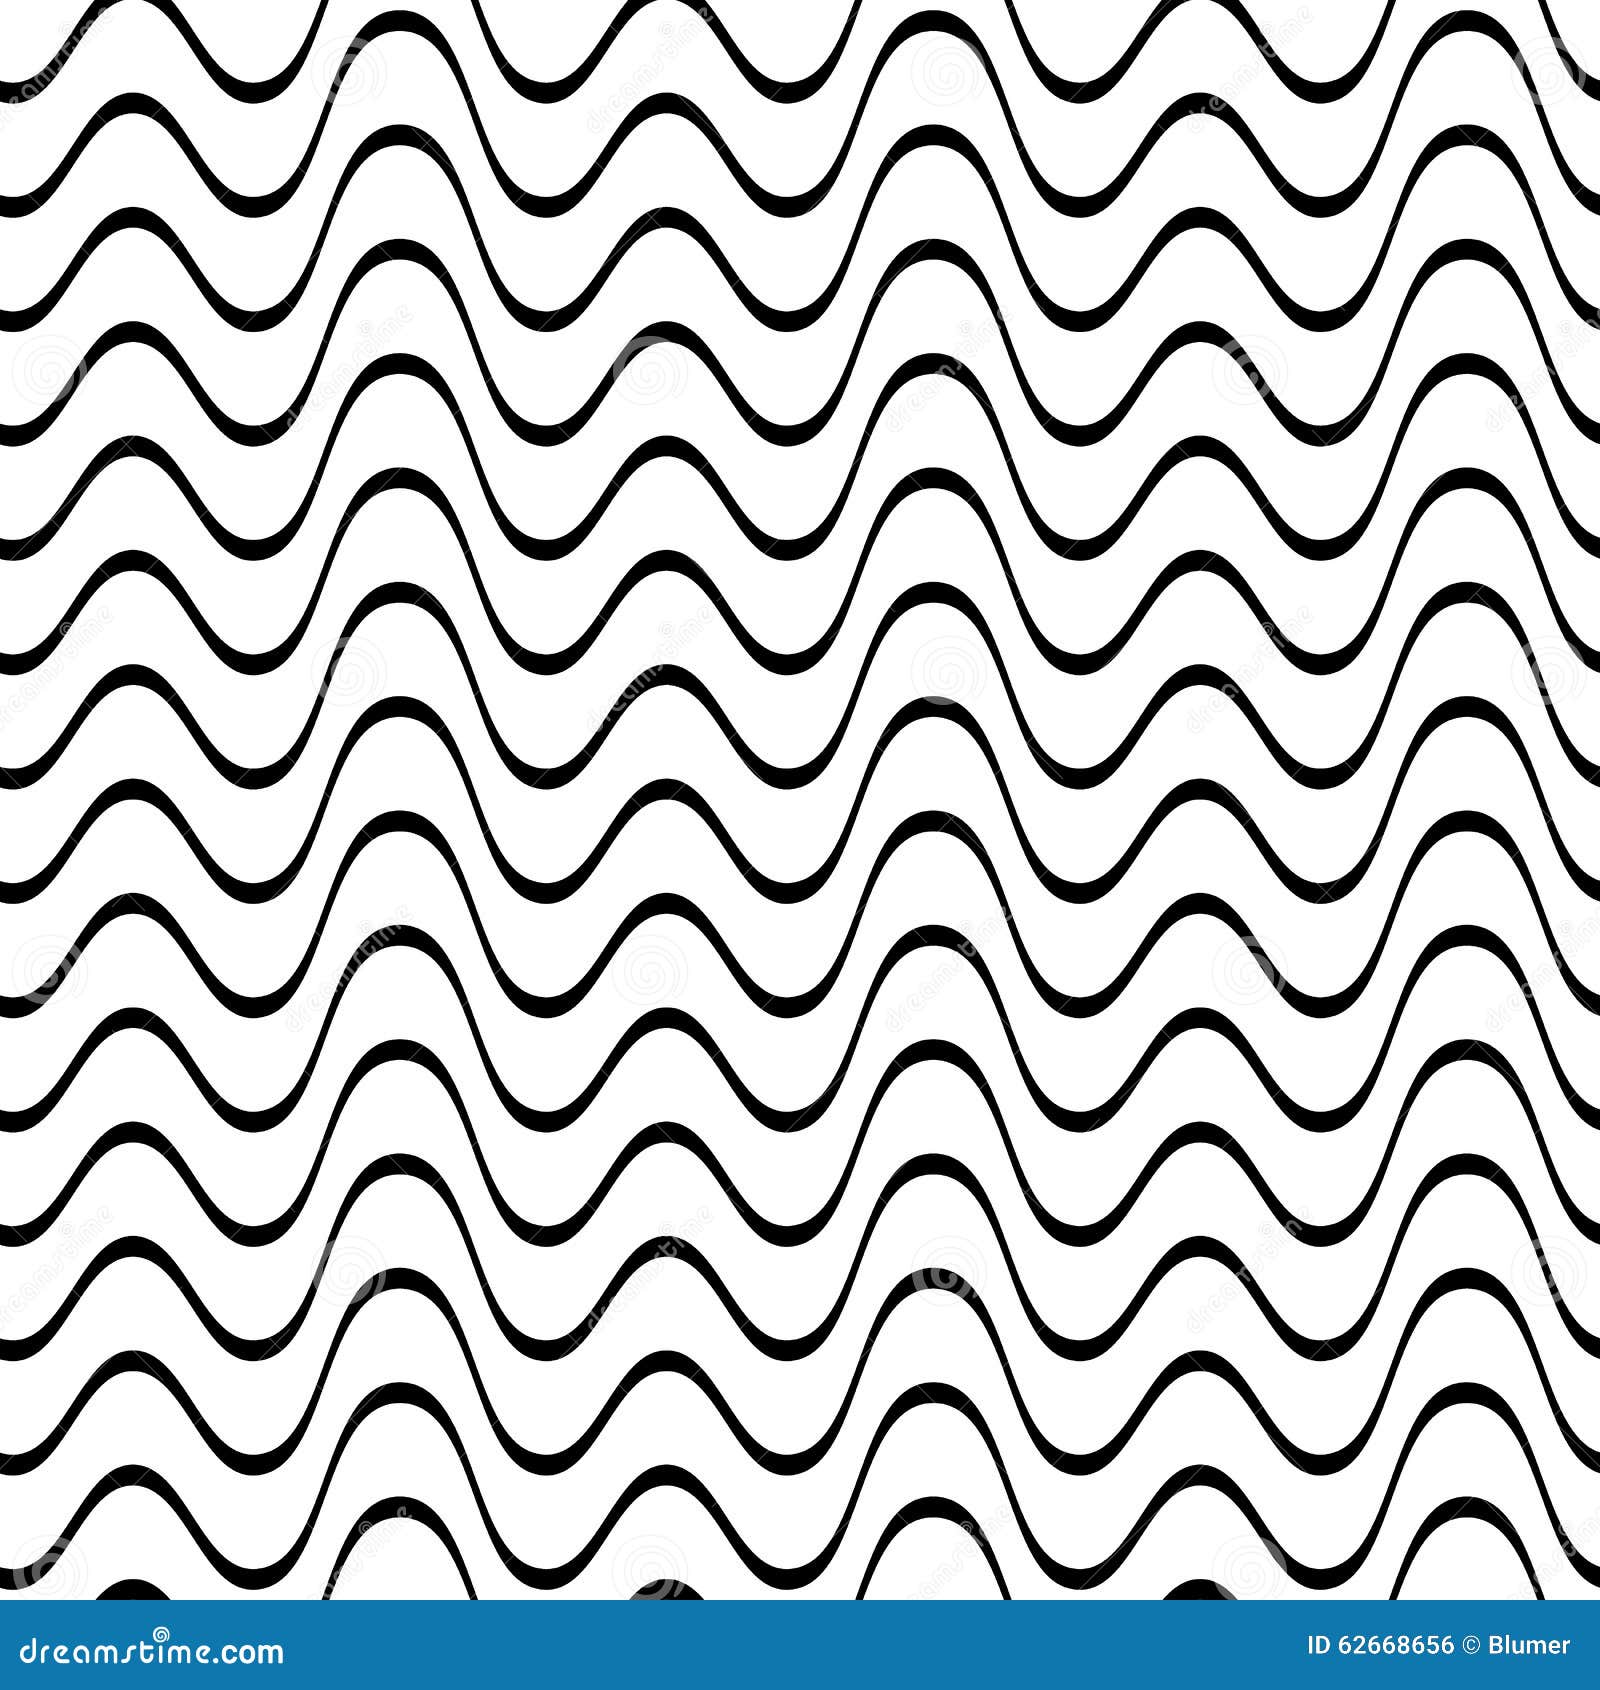 Seamless wavy line pattern stock vector. Illustration of isolated